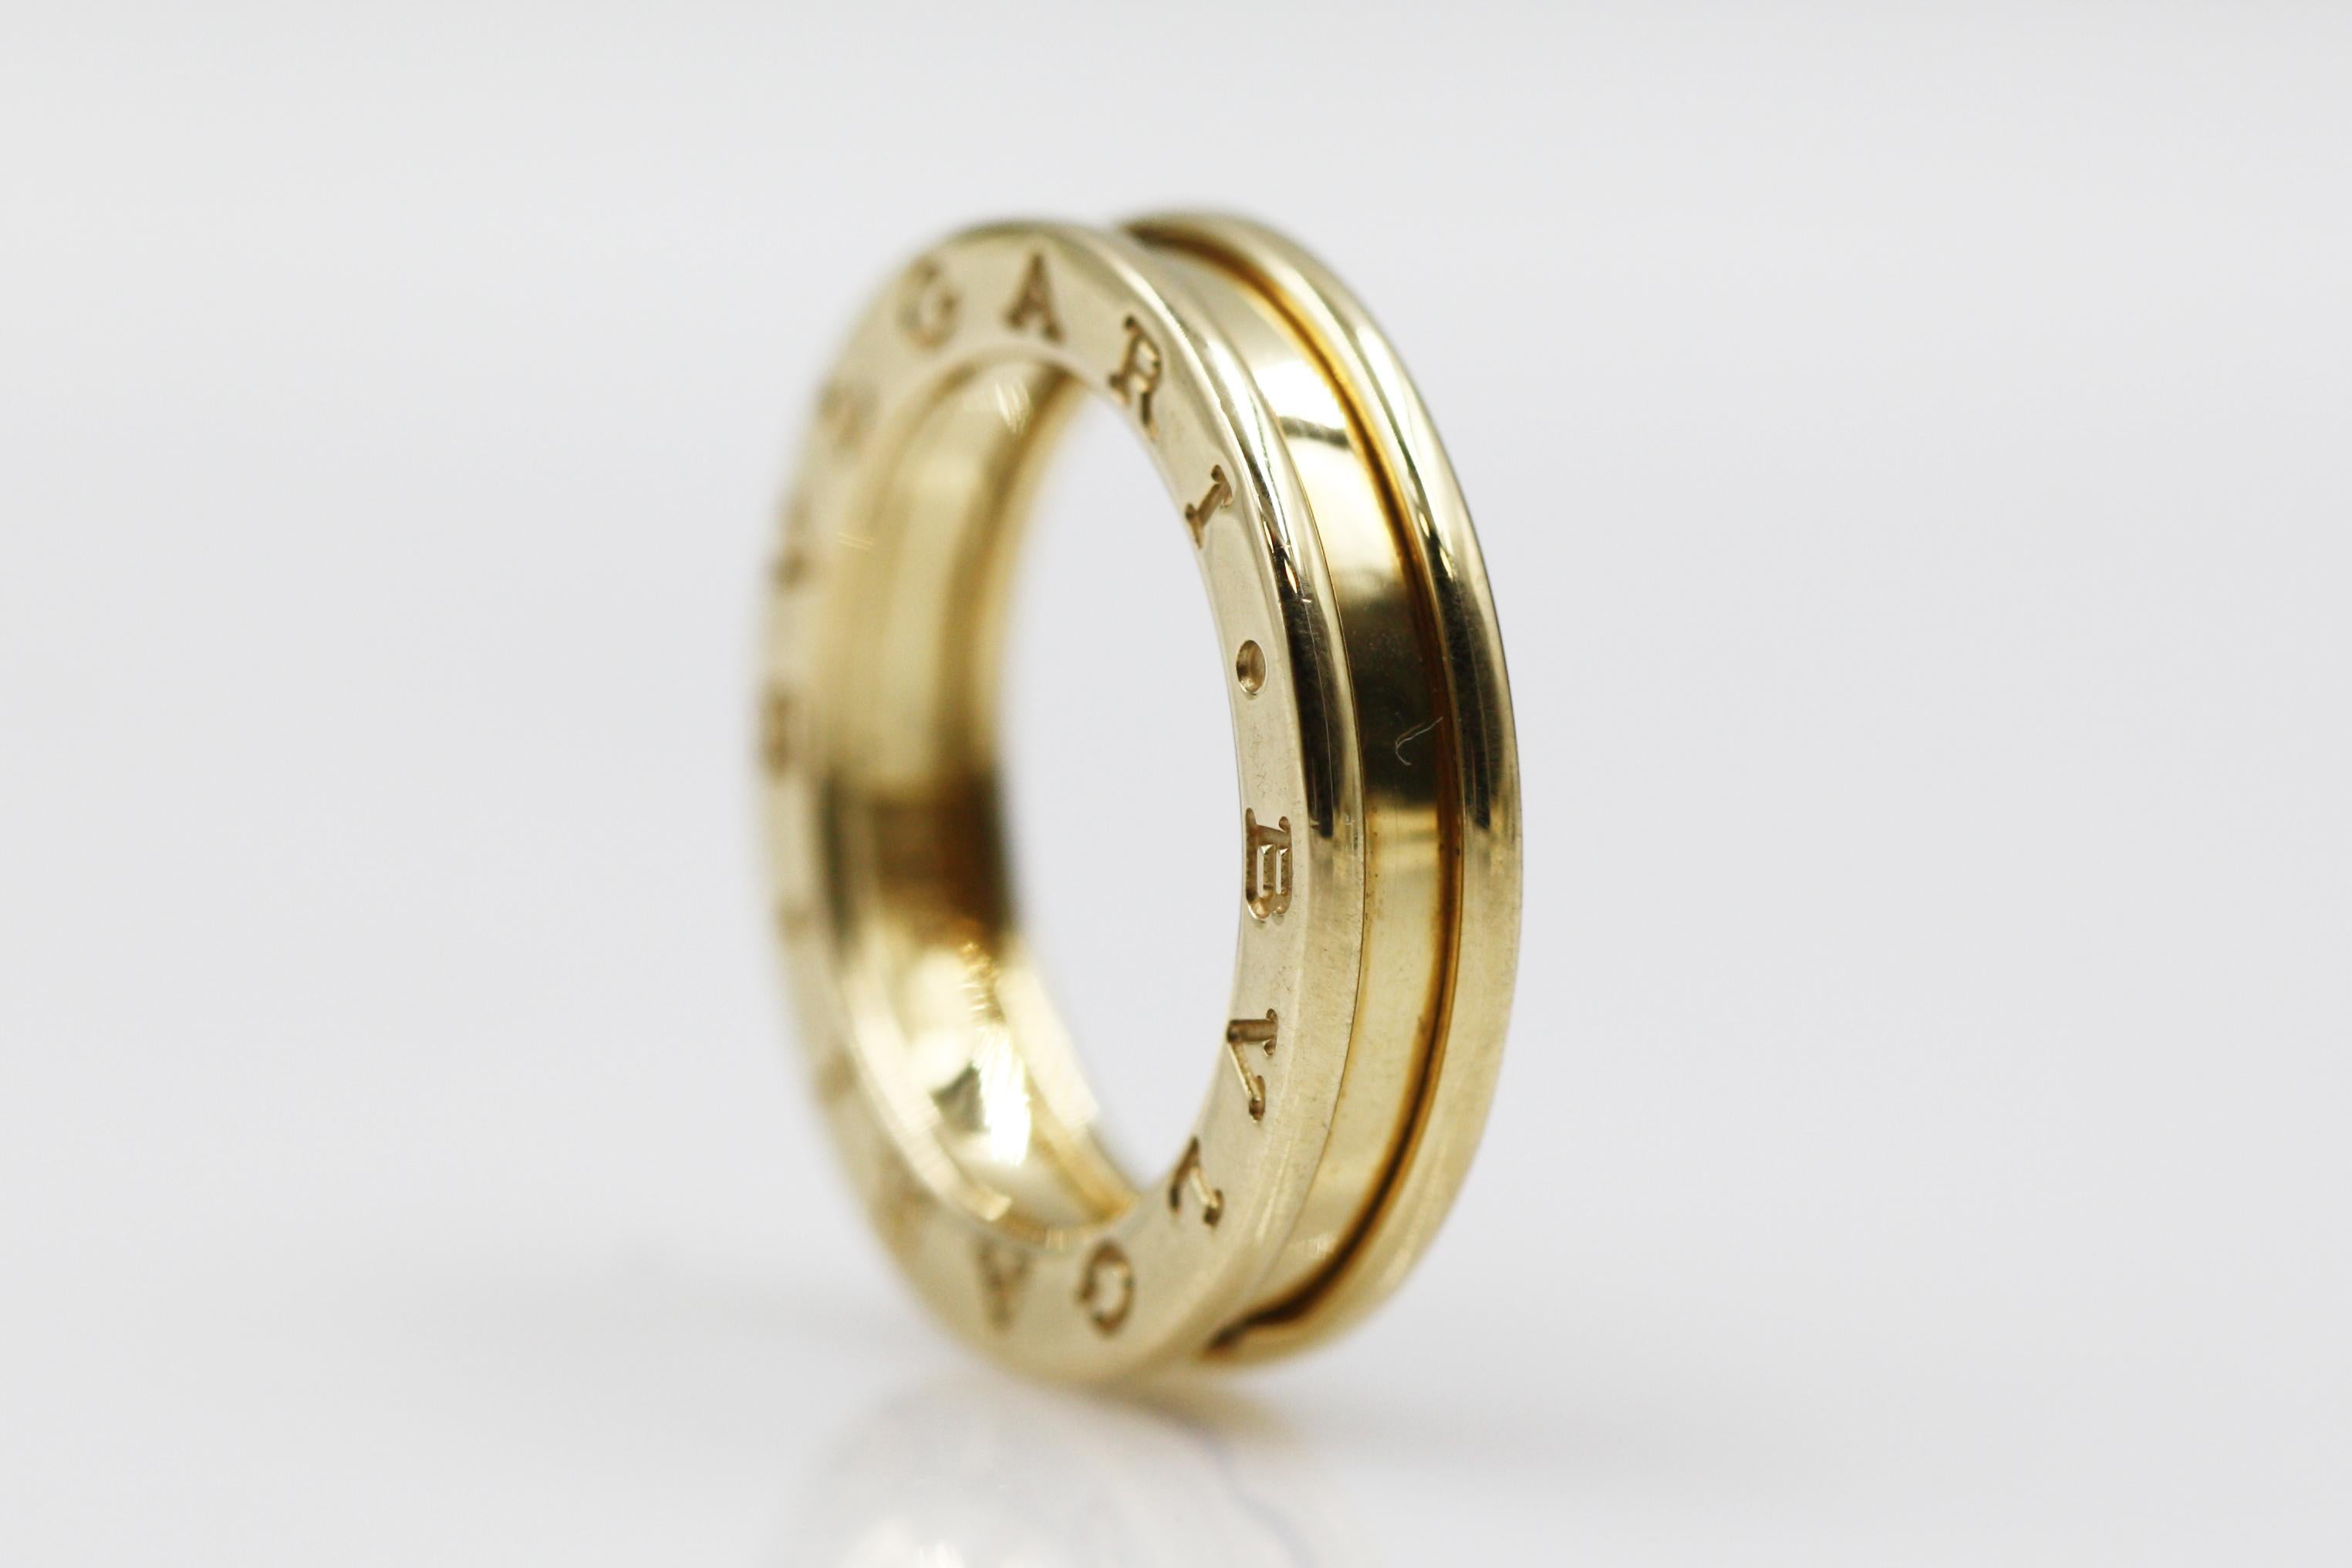 Bvlgari 18 Karat Yellow Gold Bzero-1 1 Band Ring In Excellent Condition For Sale In New York, NY